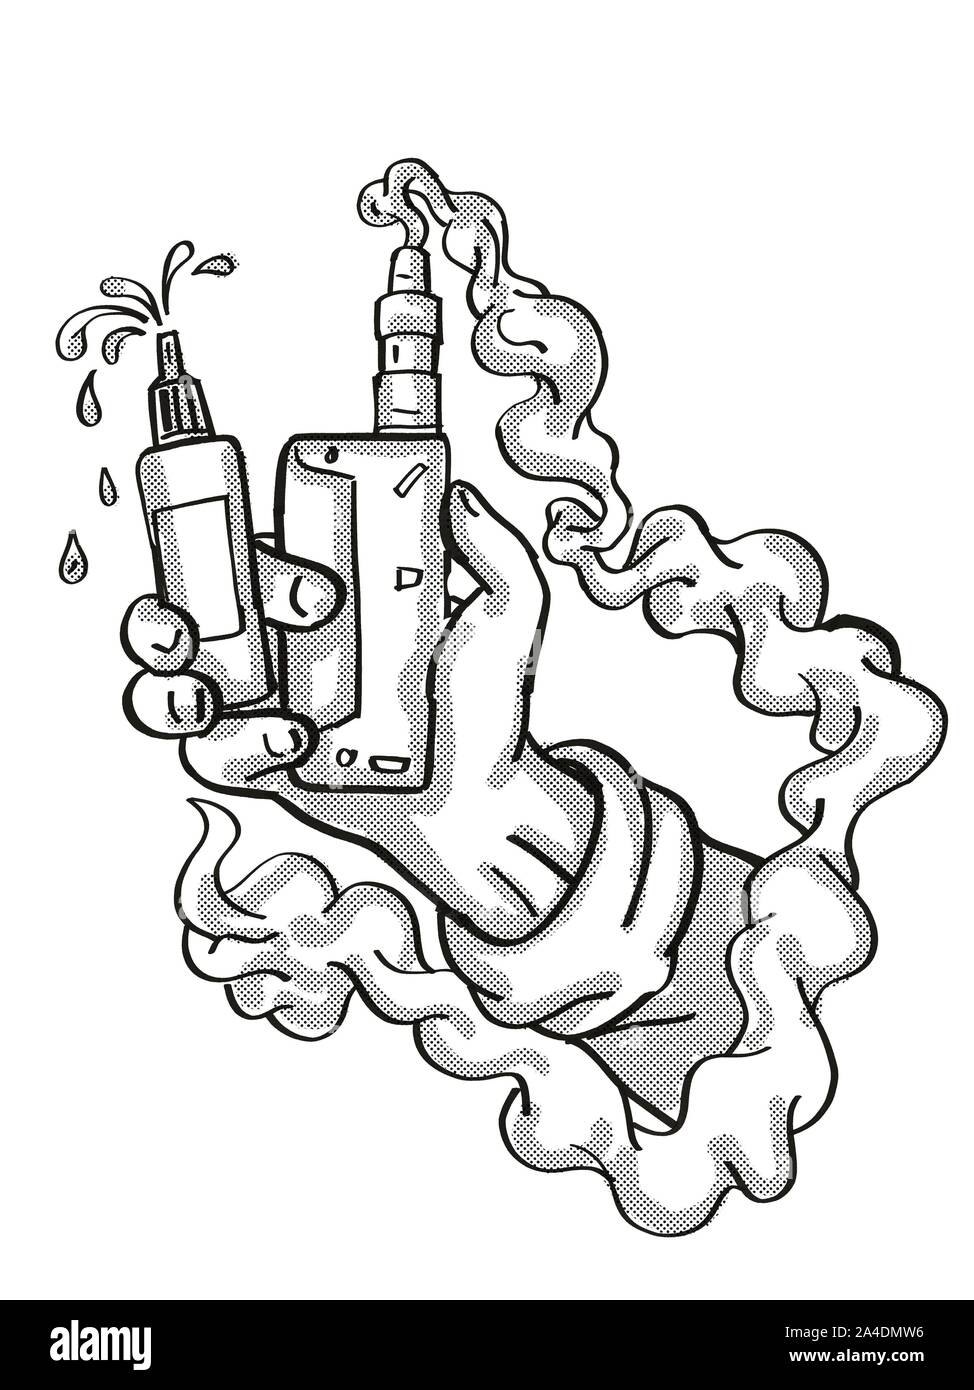 Tattoo cartoon style drawing illustration of a hand holding vape electronic  cigarette kit on isolated background done in black and white Stock Photo -  Alamy